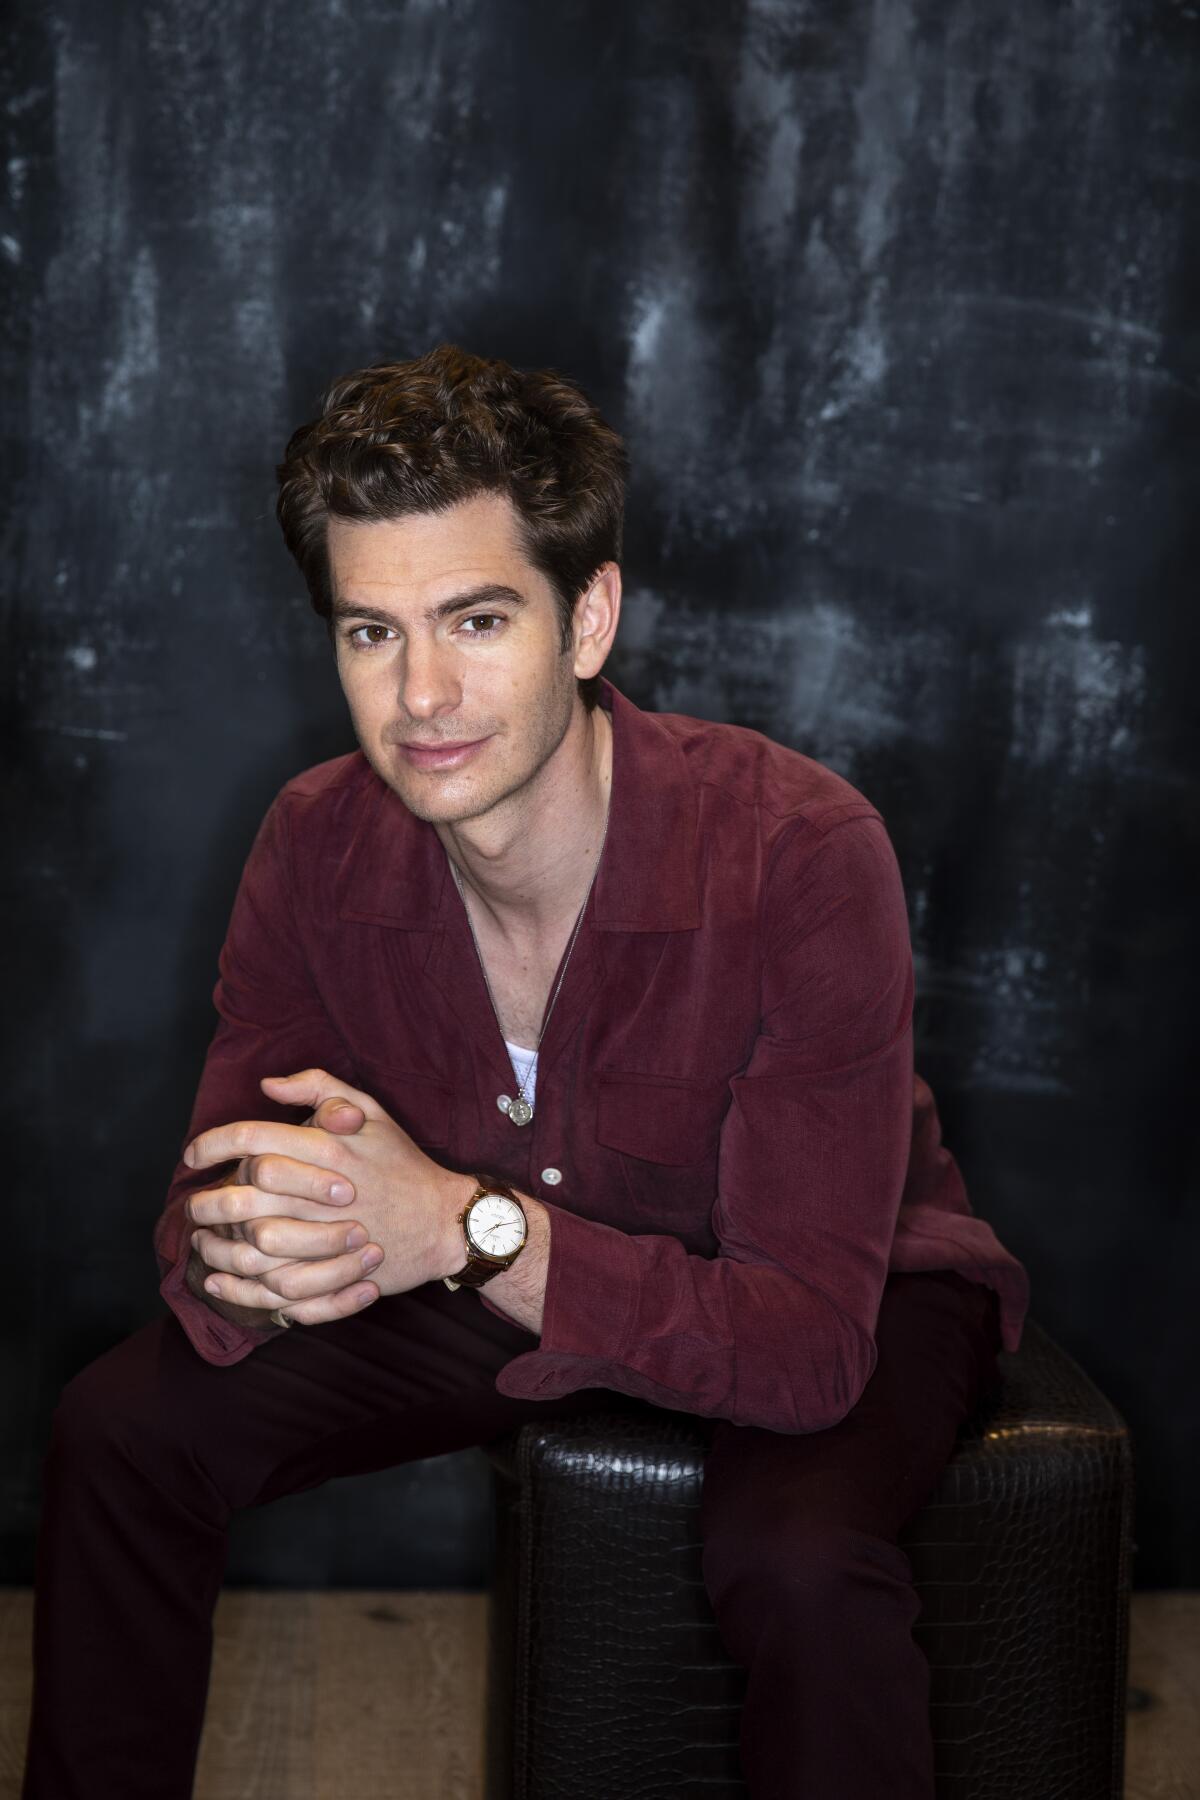 Actor Andrew Garfield is photographed at Four Seasons hotel in Los Angeles